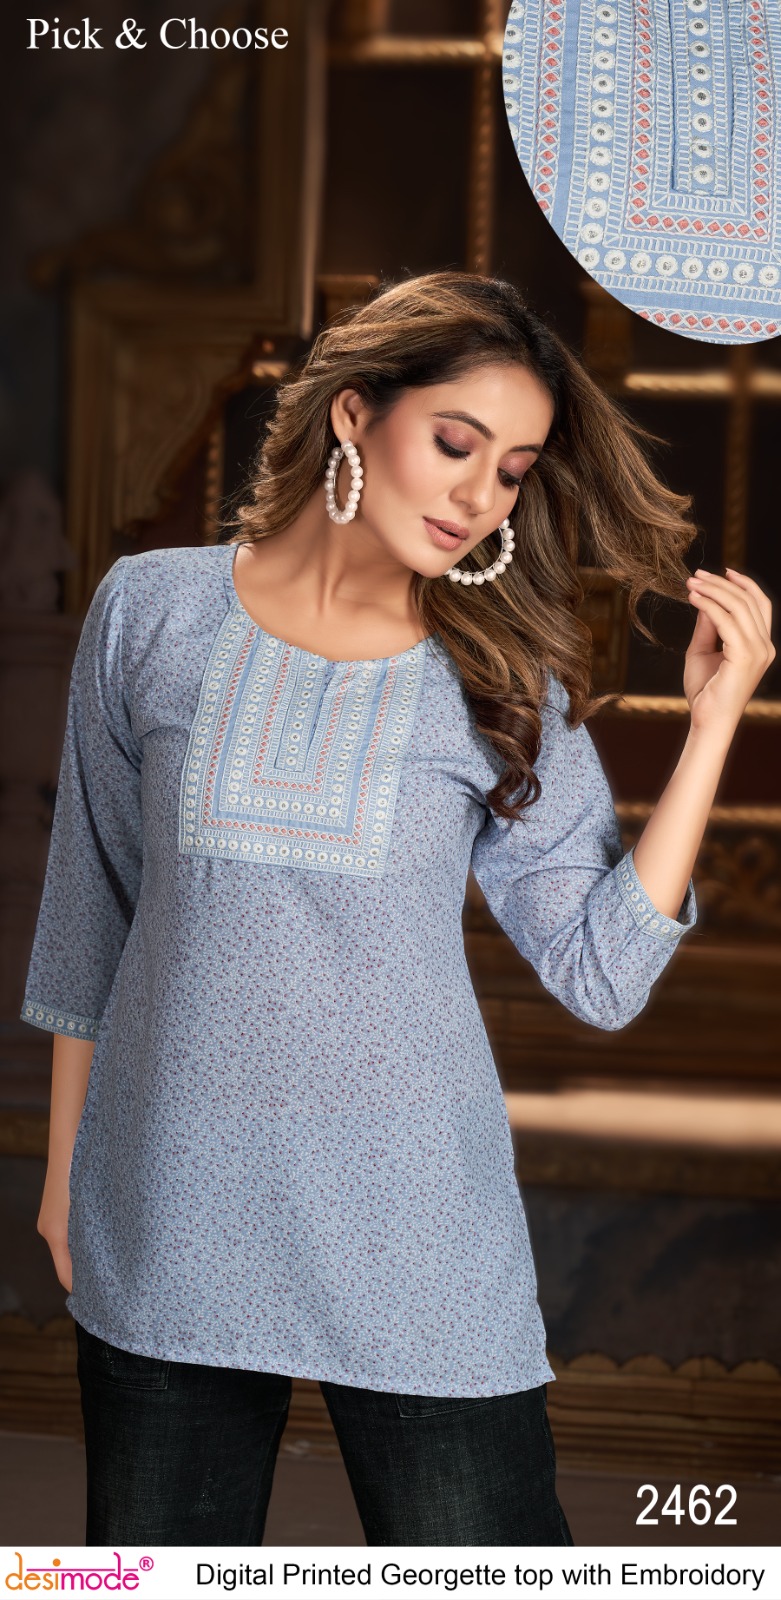 Desimode pick and choose fancy attrective look short and long kurti pick and choose